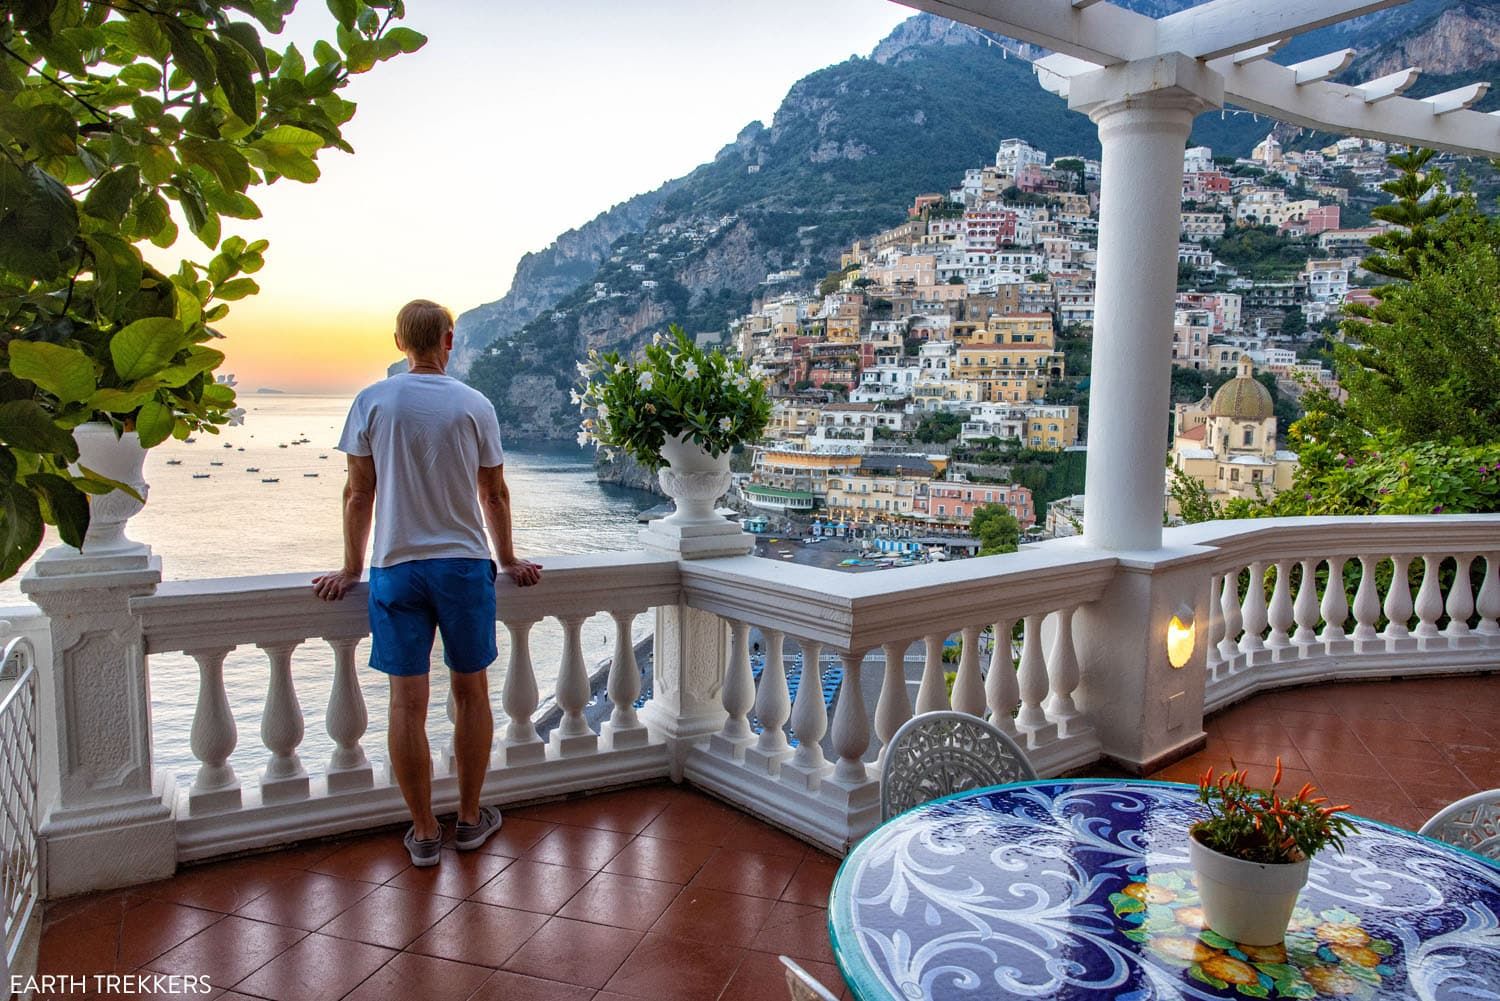 Capri, Positano, or Amalfi: The Best Place to Stay on the Amalfi